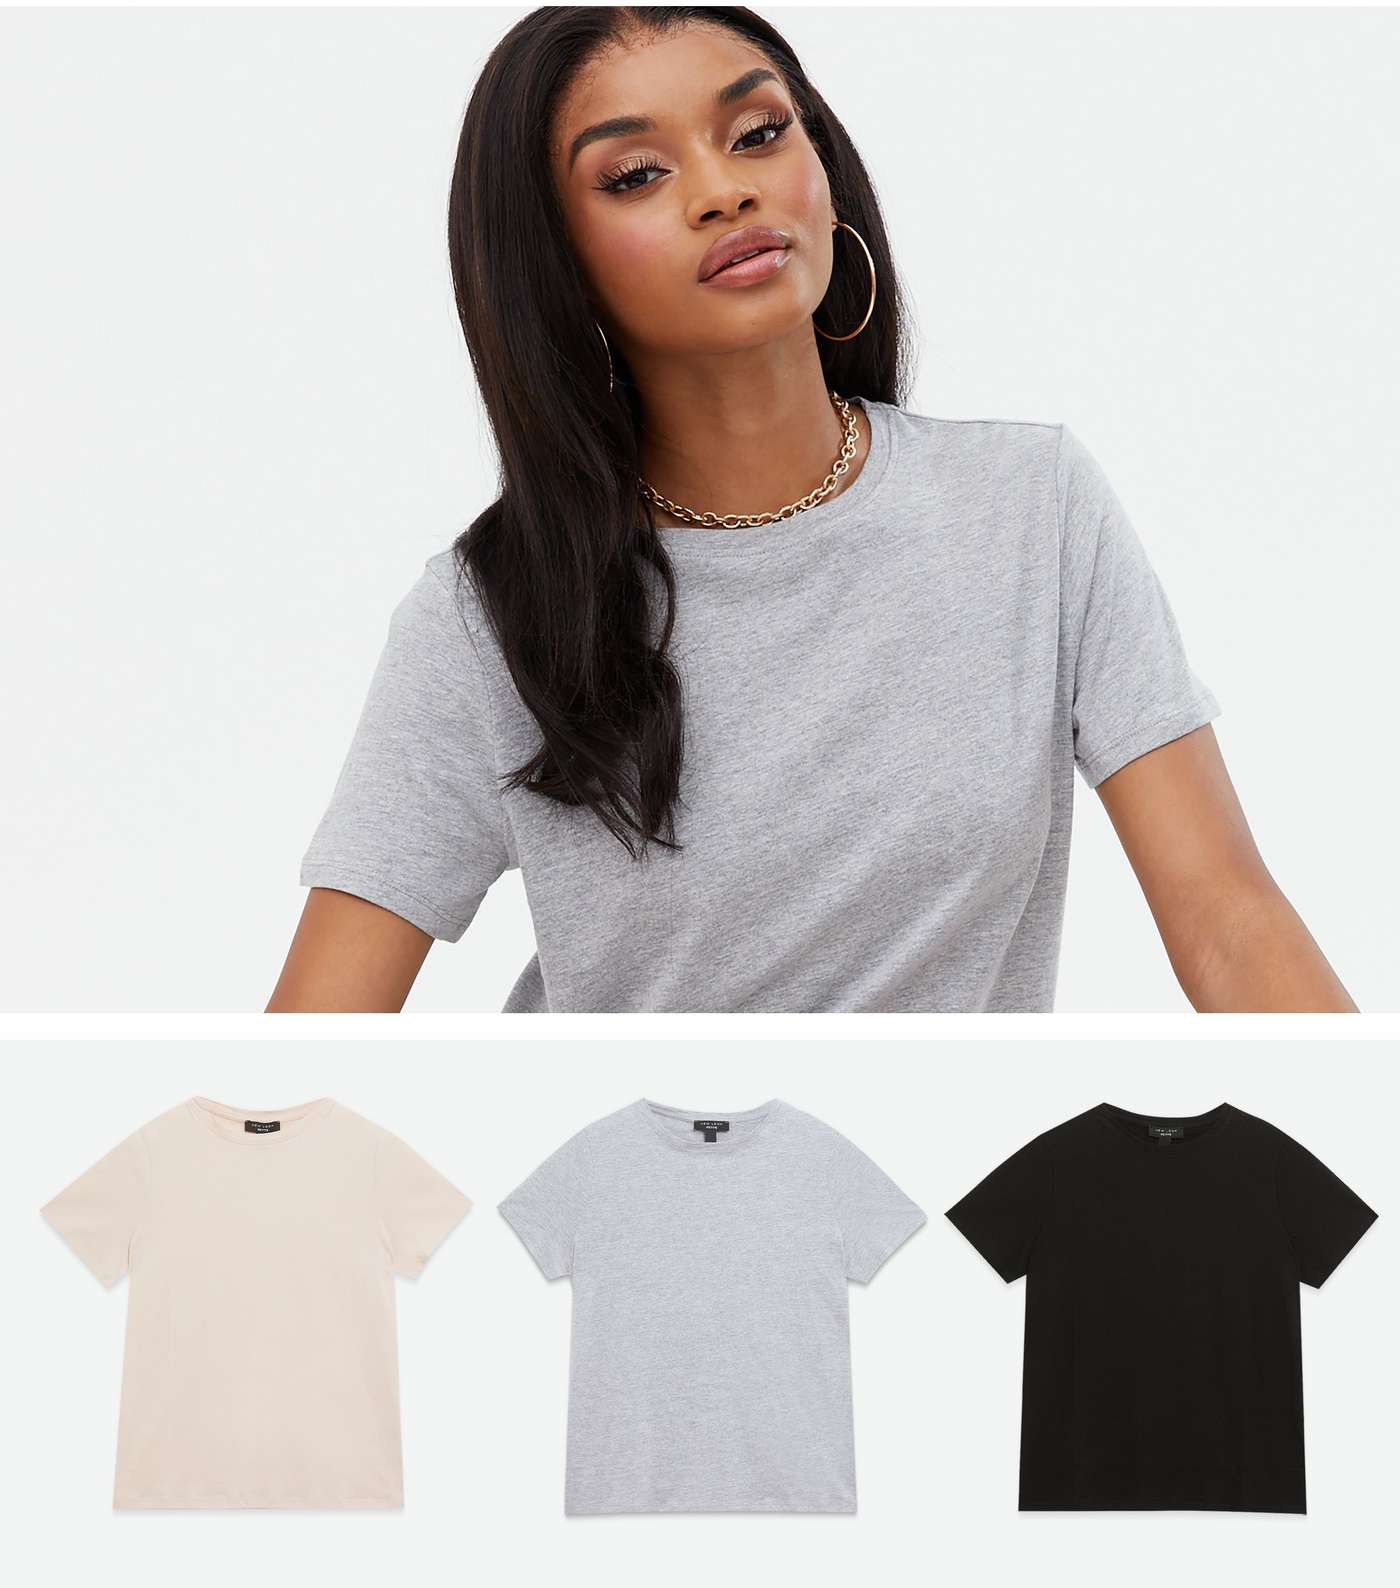 Petite 3 Pack Pale Pink Grey and Black T-Shirts